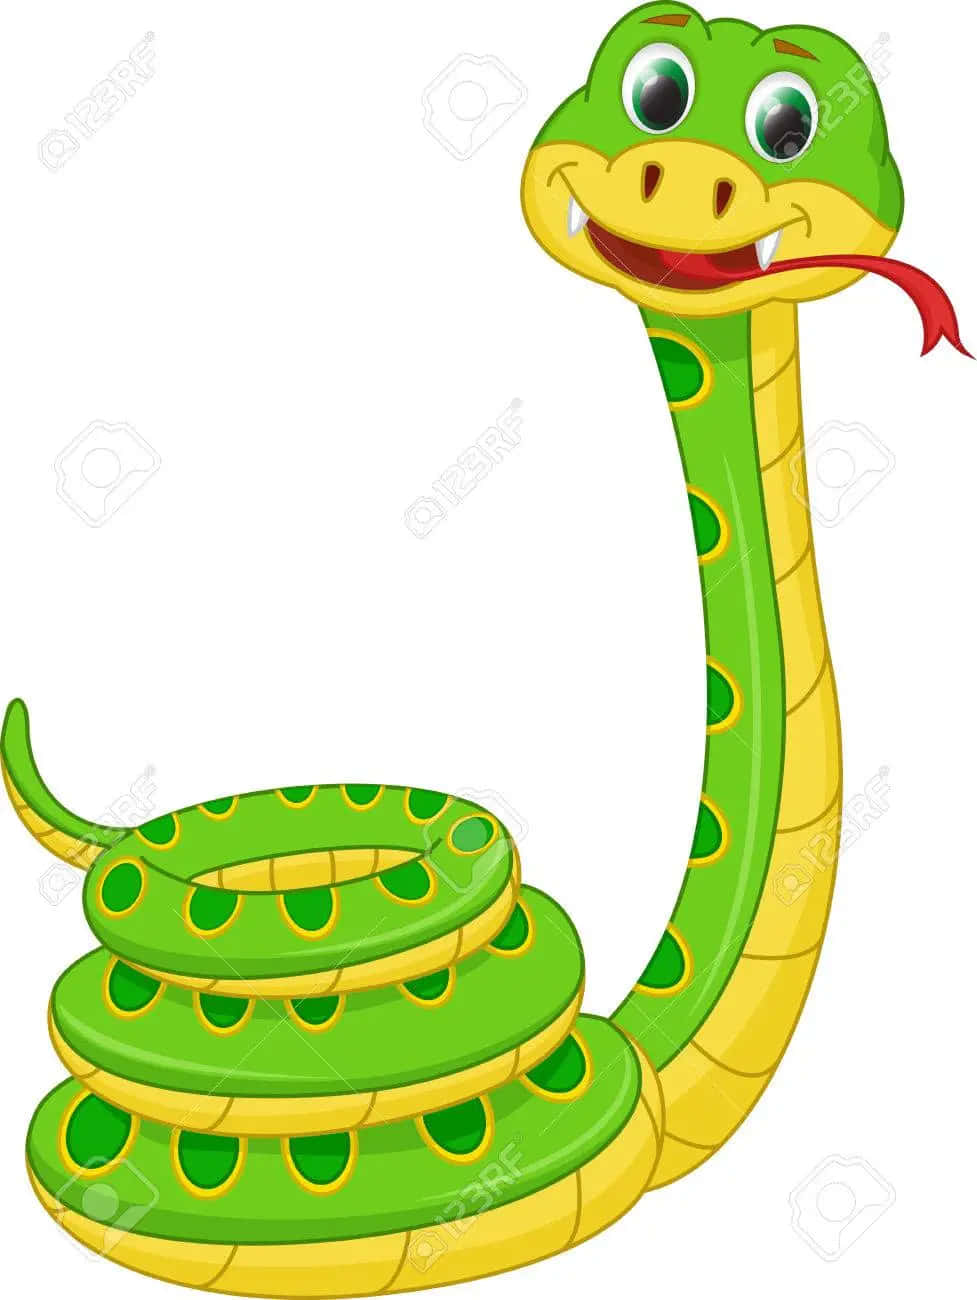 "Endearing Animated Snake Picture Showcasing Realistic Details"